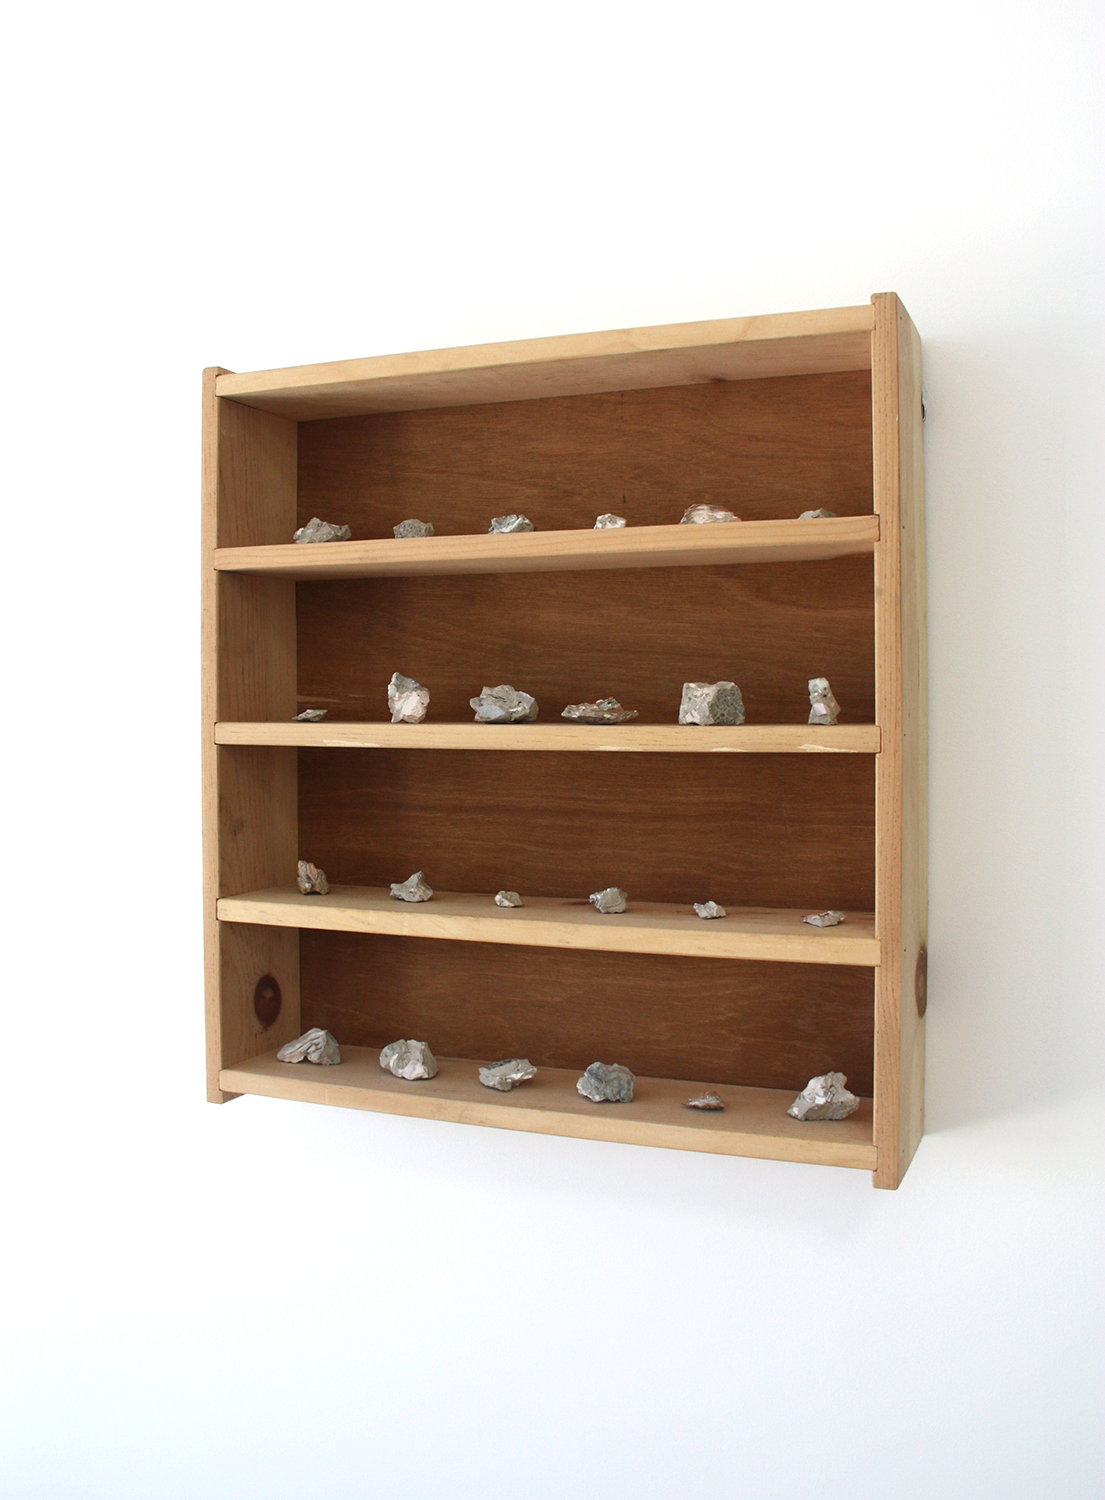   Rock Collection  Found shelving unit, mixed ceramic waste 25” x 25” x 7” 